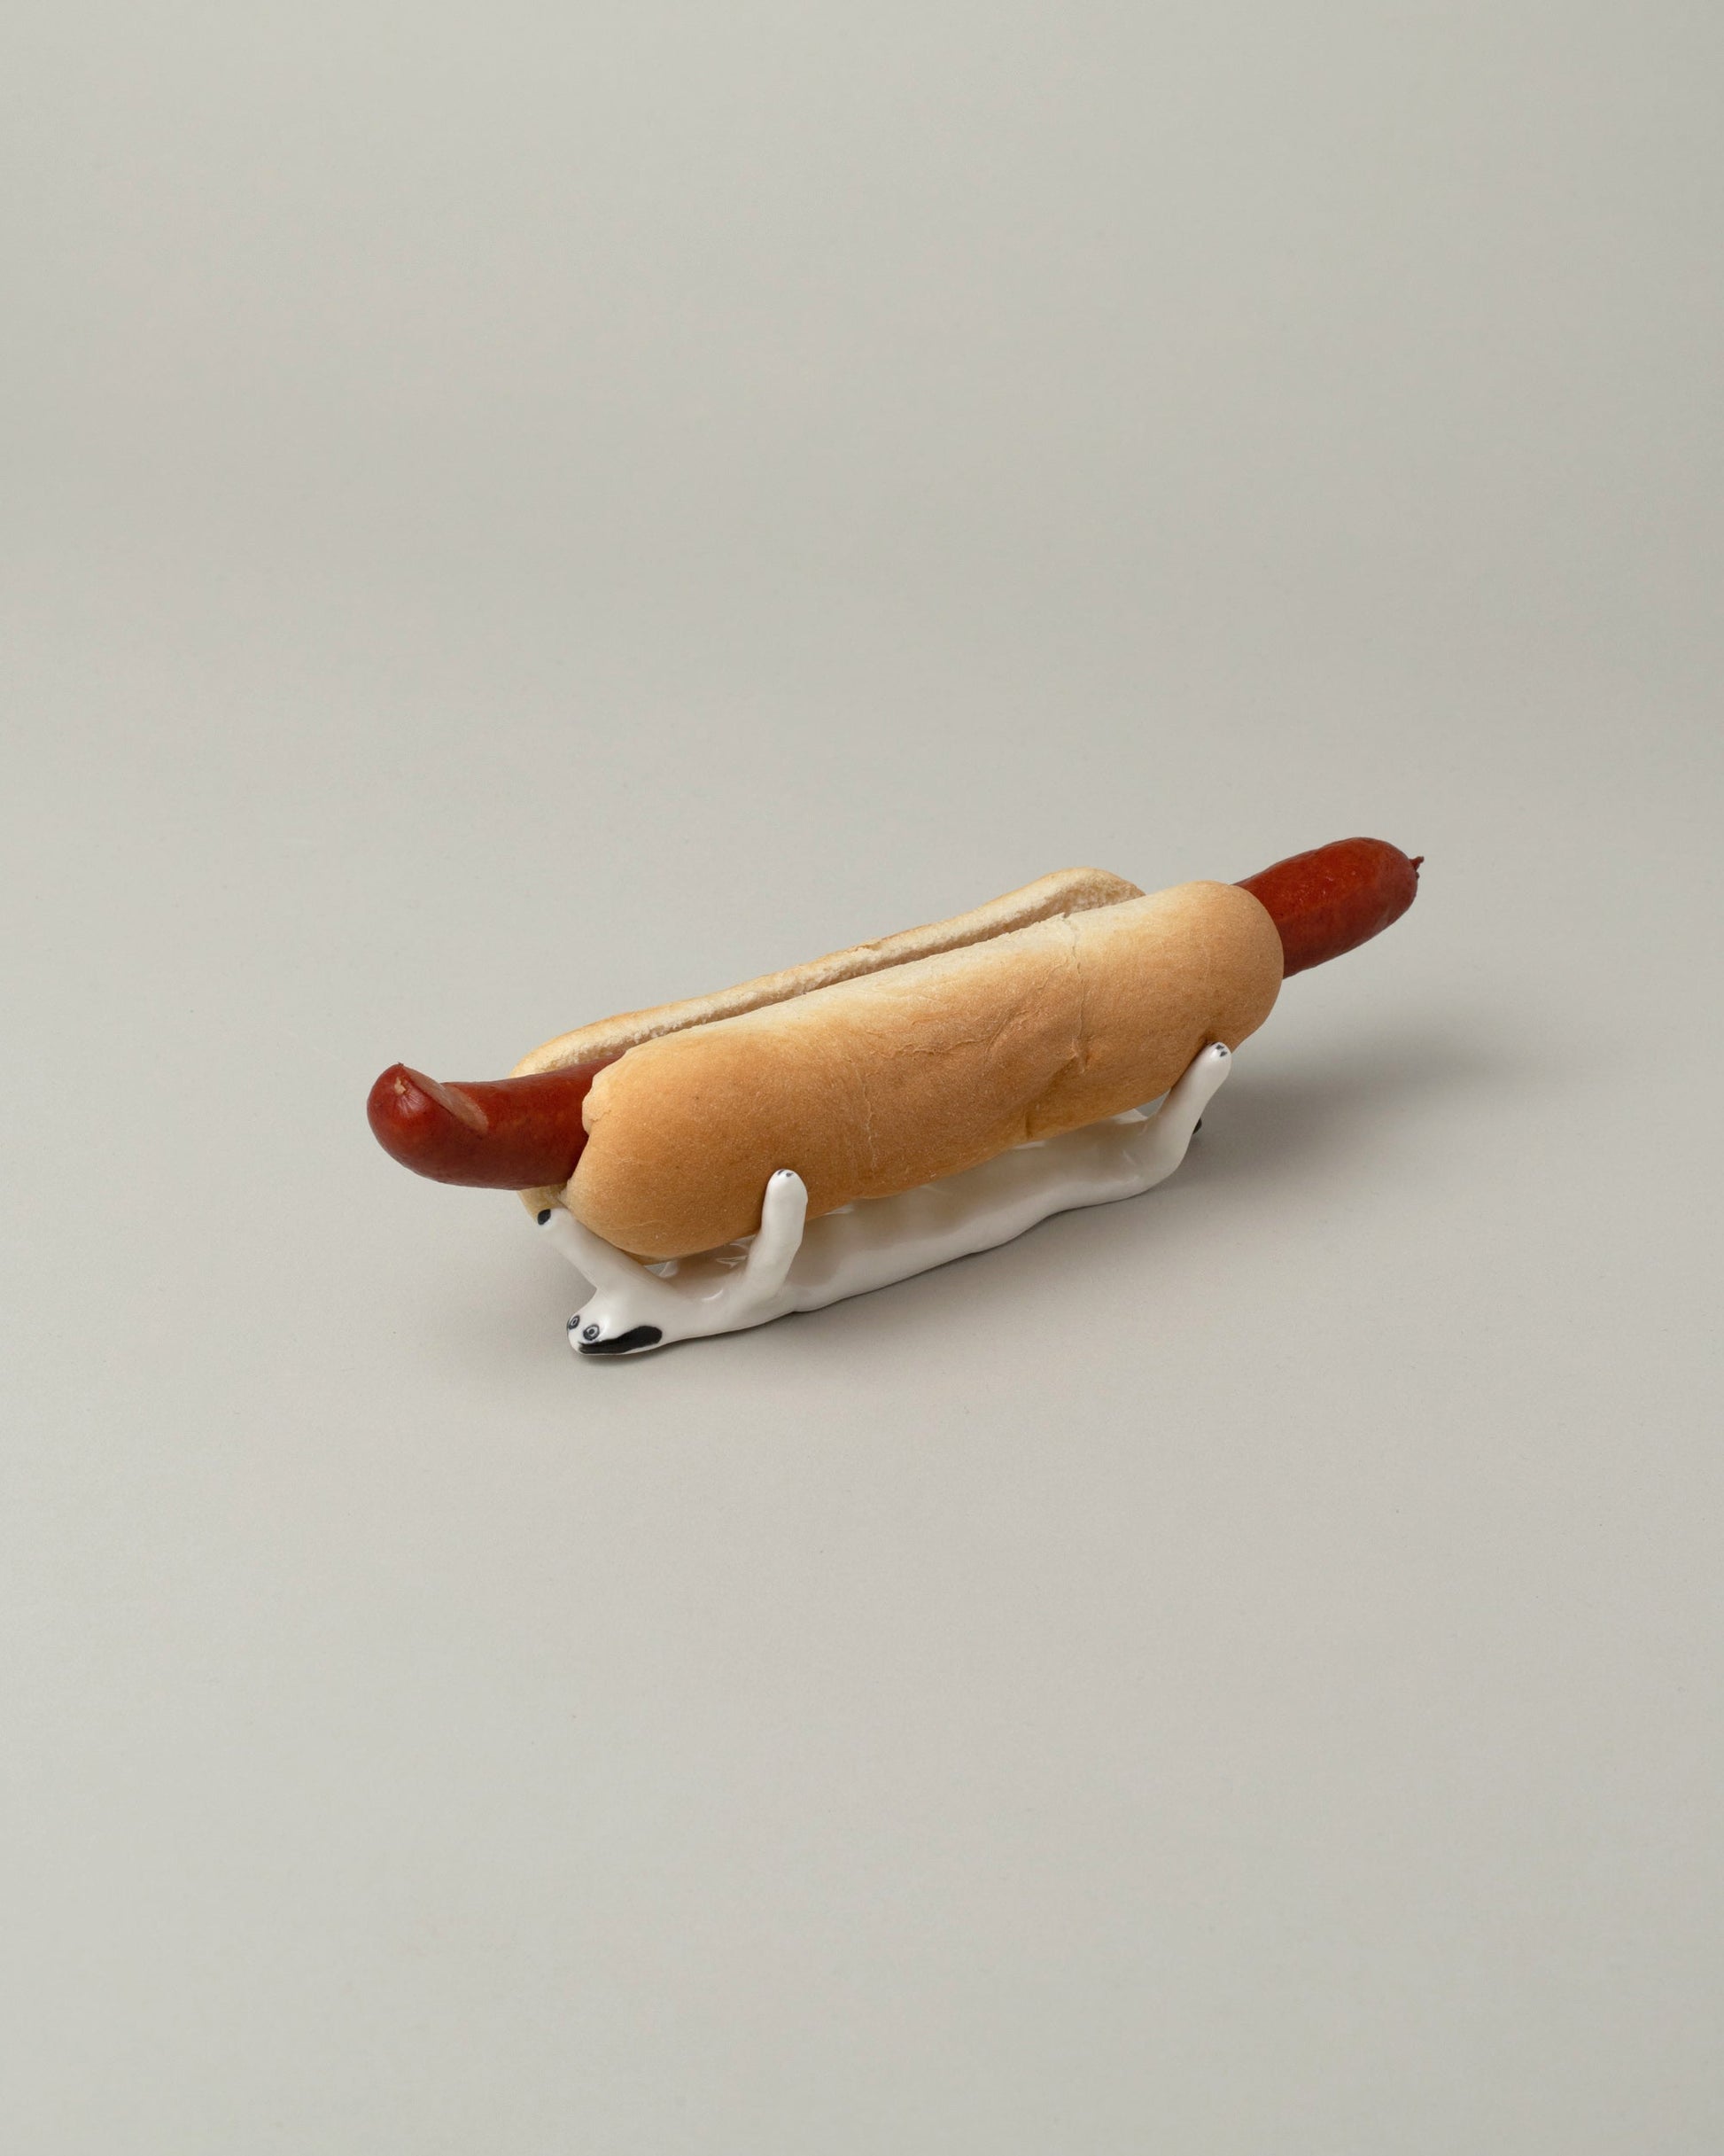 Detail view of the Eleonor Boström Hot Dog Rack on light color background.